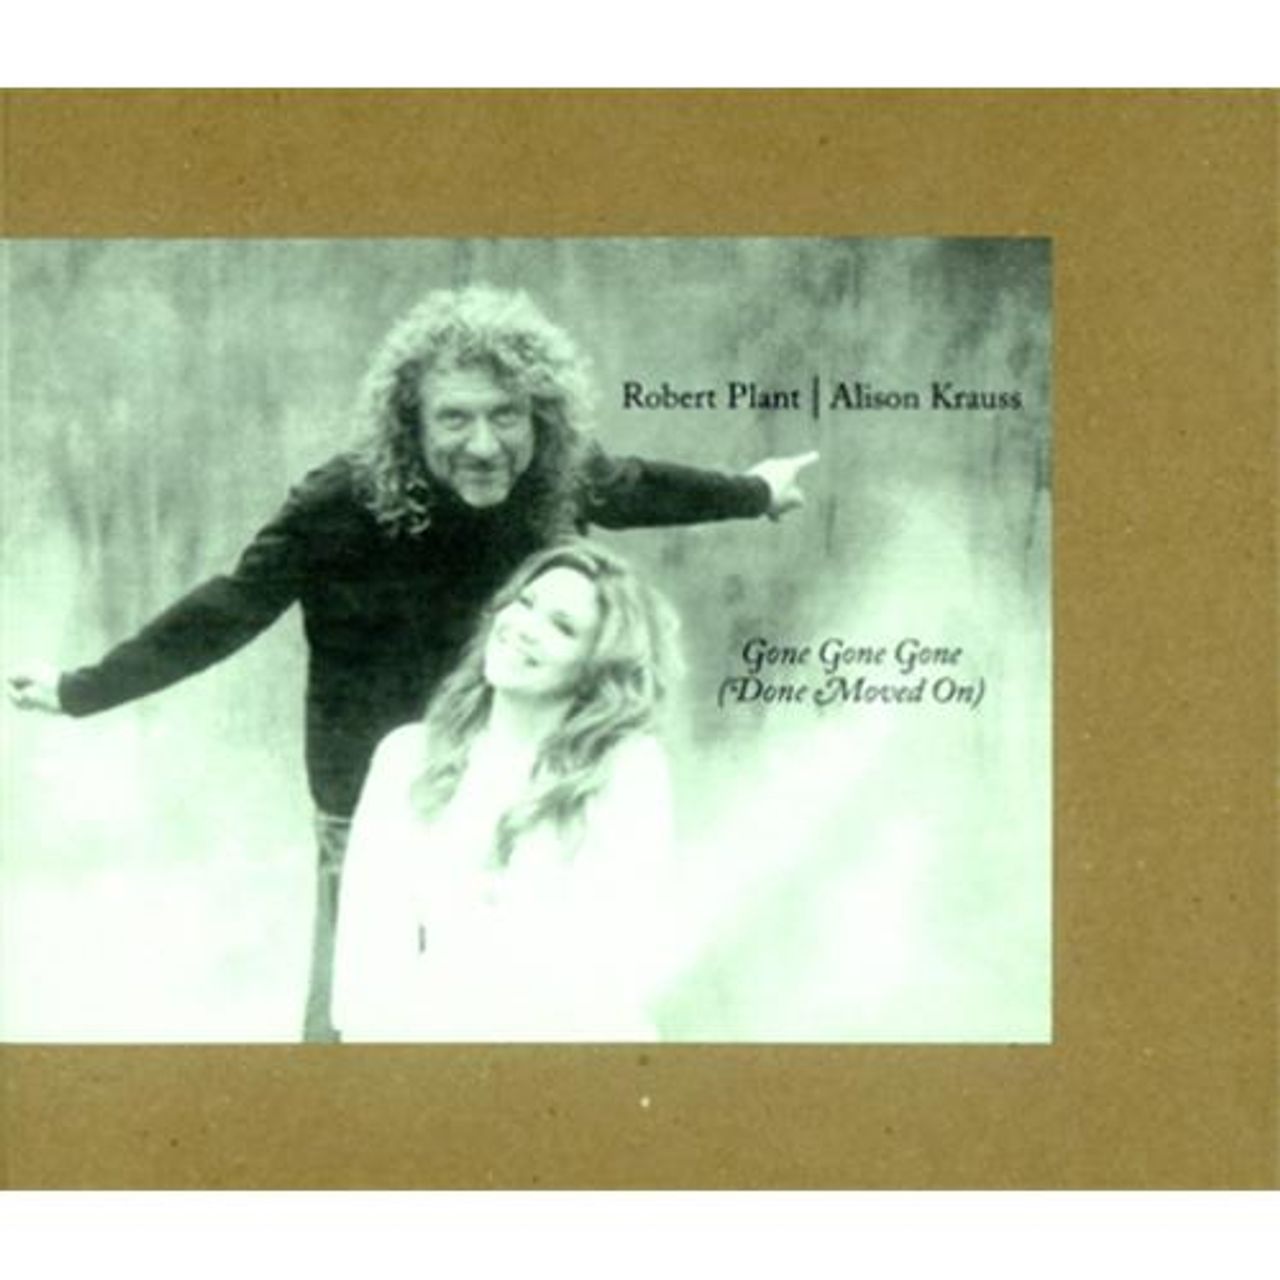 Robert Plant & Alison Krauss Gone, Gone, Gone (Done Moved On) US Promo CD single (CD5 / 5") 116190752PS101